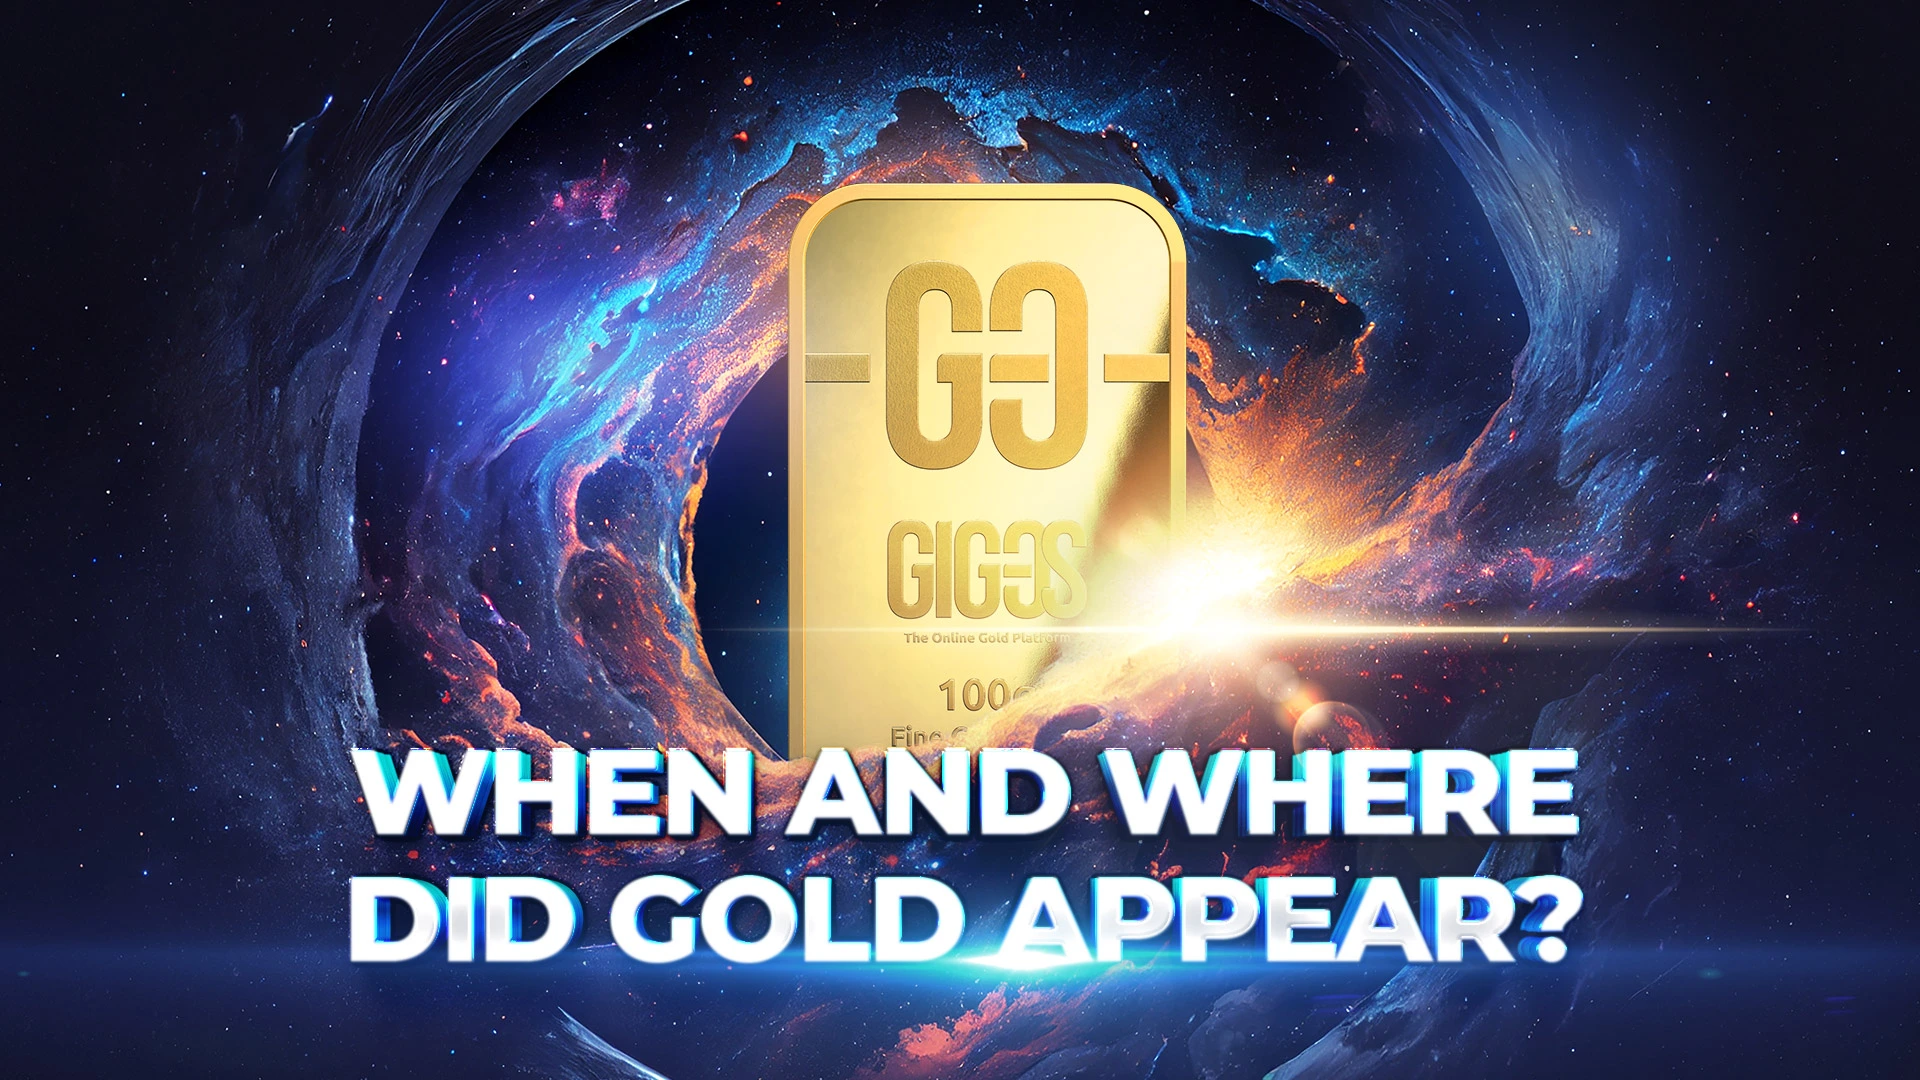 [VIDEO] When and where did gold appear?
